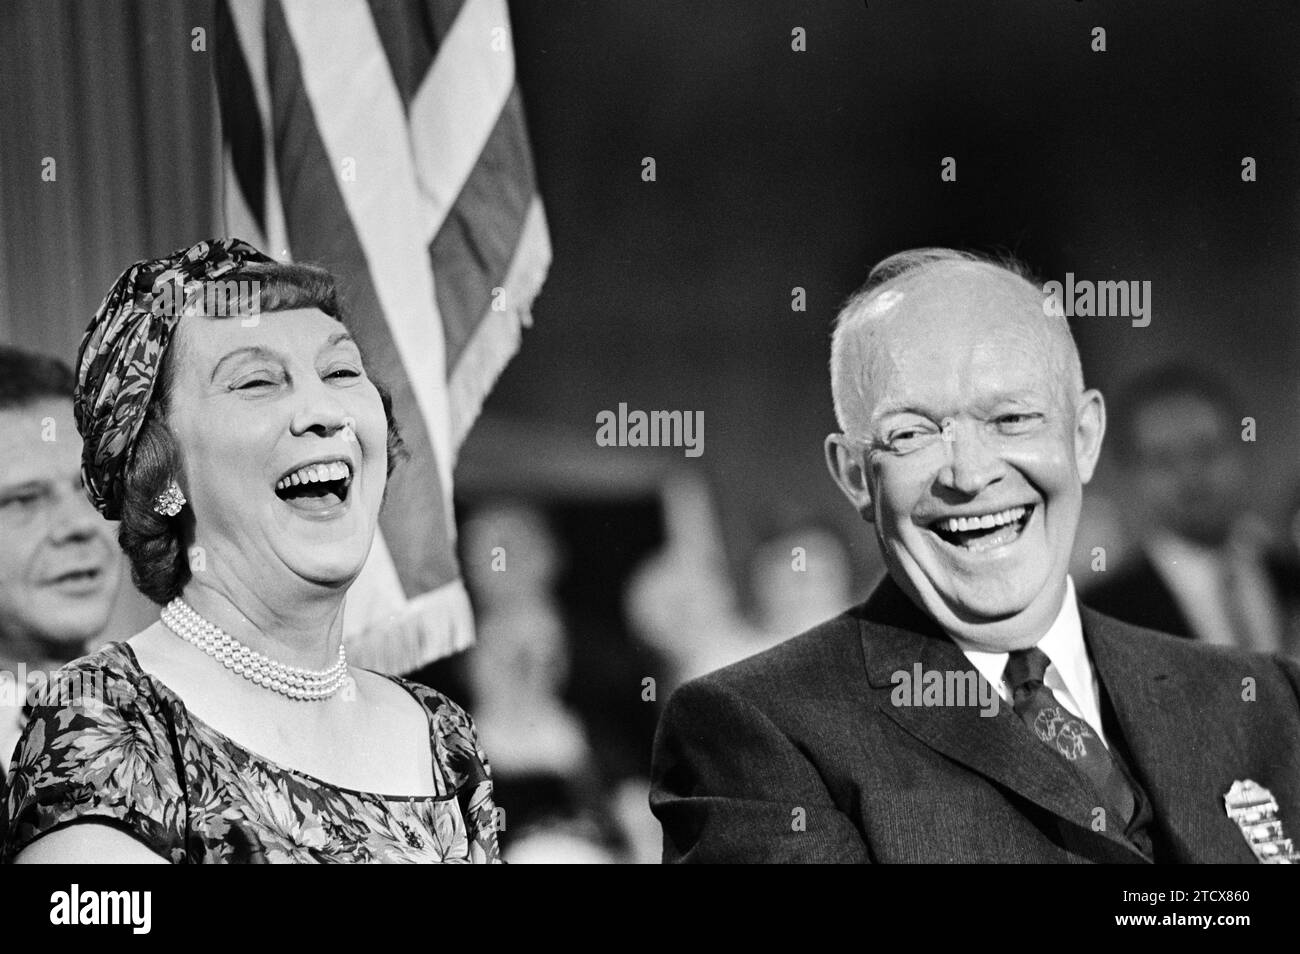 U.S. President Dwight D. Eisenhower and his wife First Lady Mamie Eisenhower smiling during Republican National Convention, Chicago, Illinois, USA, Warren K. Leffler, U.S. News & World Report Magazine Photograph Collection Stock Photo